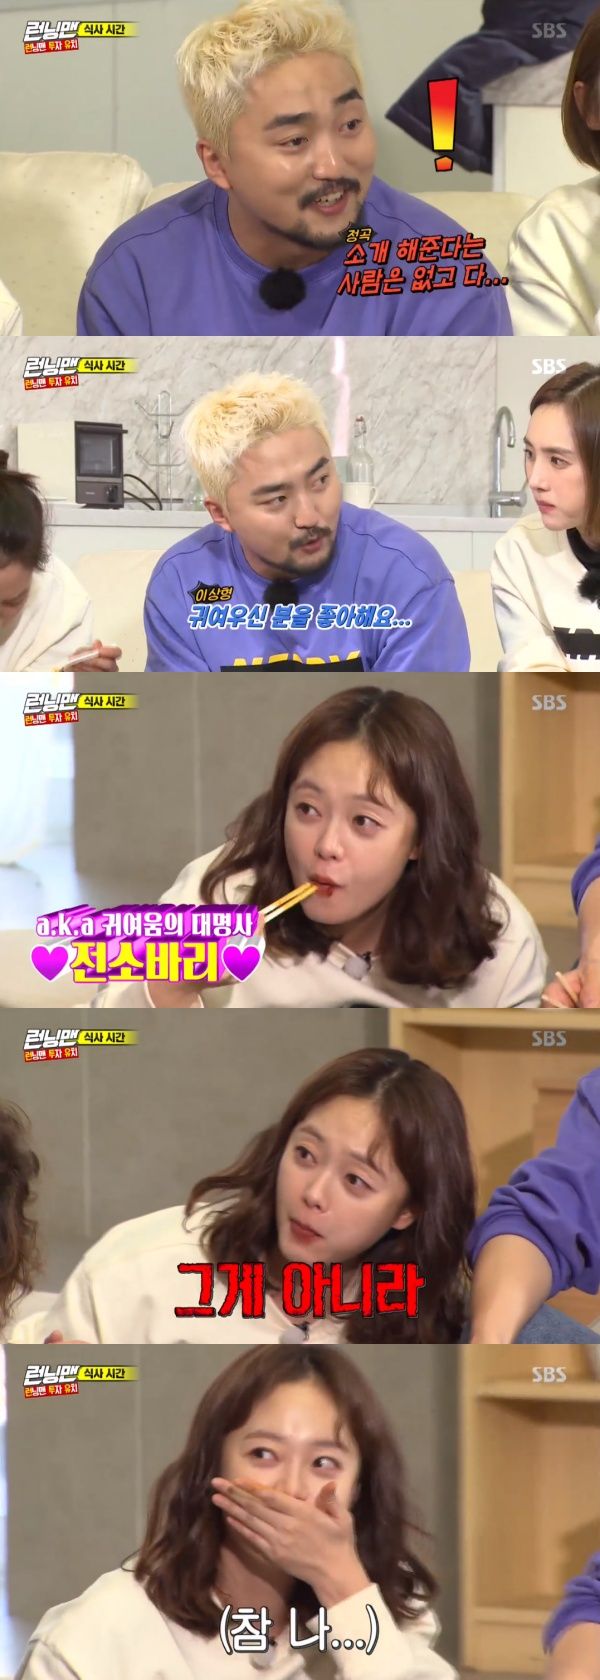 Running Man Yoo Byung-jae was embarrassed when he recommended Jeon So-min as his ideal type.On the 8th, SBS entertainment program Running Man featured actor Kang Na Lee Hee-jin, group Omai Girl infant, and broadcaster Yoo Byung-jae as guests.On the day of the meal, the members ate seafood chanpon. During the meal, Yoo Jae-Suk asked, Do you have a girlfriend? Yoo Byung-jae said, There is no now.Kim Jong-guk said, It is okay for the sickness, and Haha said, It is a sickness. Yoo Jae-Suk, who listened carefully to it, said, Why do not you introduce anyone?Yoo Byung-jae asked the ideal type, Of course I can not meet it as an ideal type, but I like cute people.Running Man members recommended Jeon So-min as an instant blind date, saying, Somin is cute. Yoo Byung-jae said, I like people who are not cute or charming, but who are loopholes.The members once again emphasized that somin is a lot of loopholes.I do not think so, Yubang said. I am trying hard to do something, but there is a loophole in the middle.The members also recommended Jeon Sang-min without losing, and Yubang Jae said, It is not that. It is cute, but you should not know what you are cute.In the end, Yoo Byung-jae refused to say I am not my sister and laughed. Then, Jeon So-min said, I like a man without a beard.